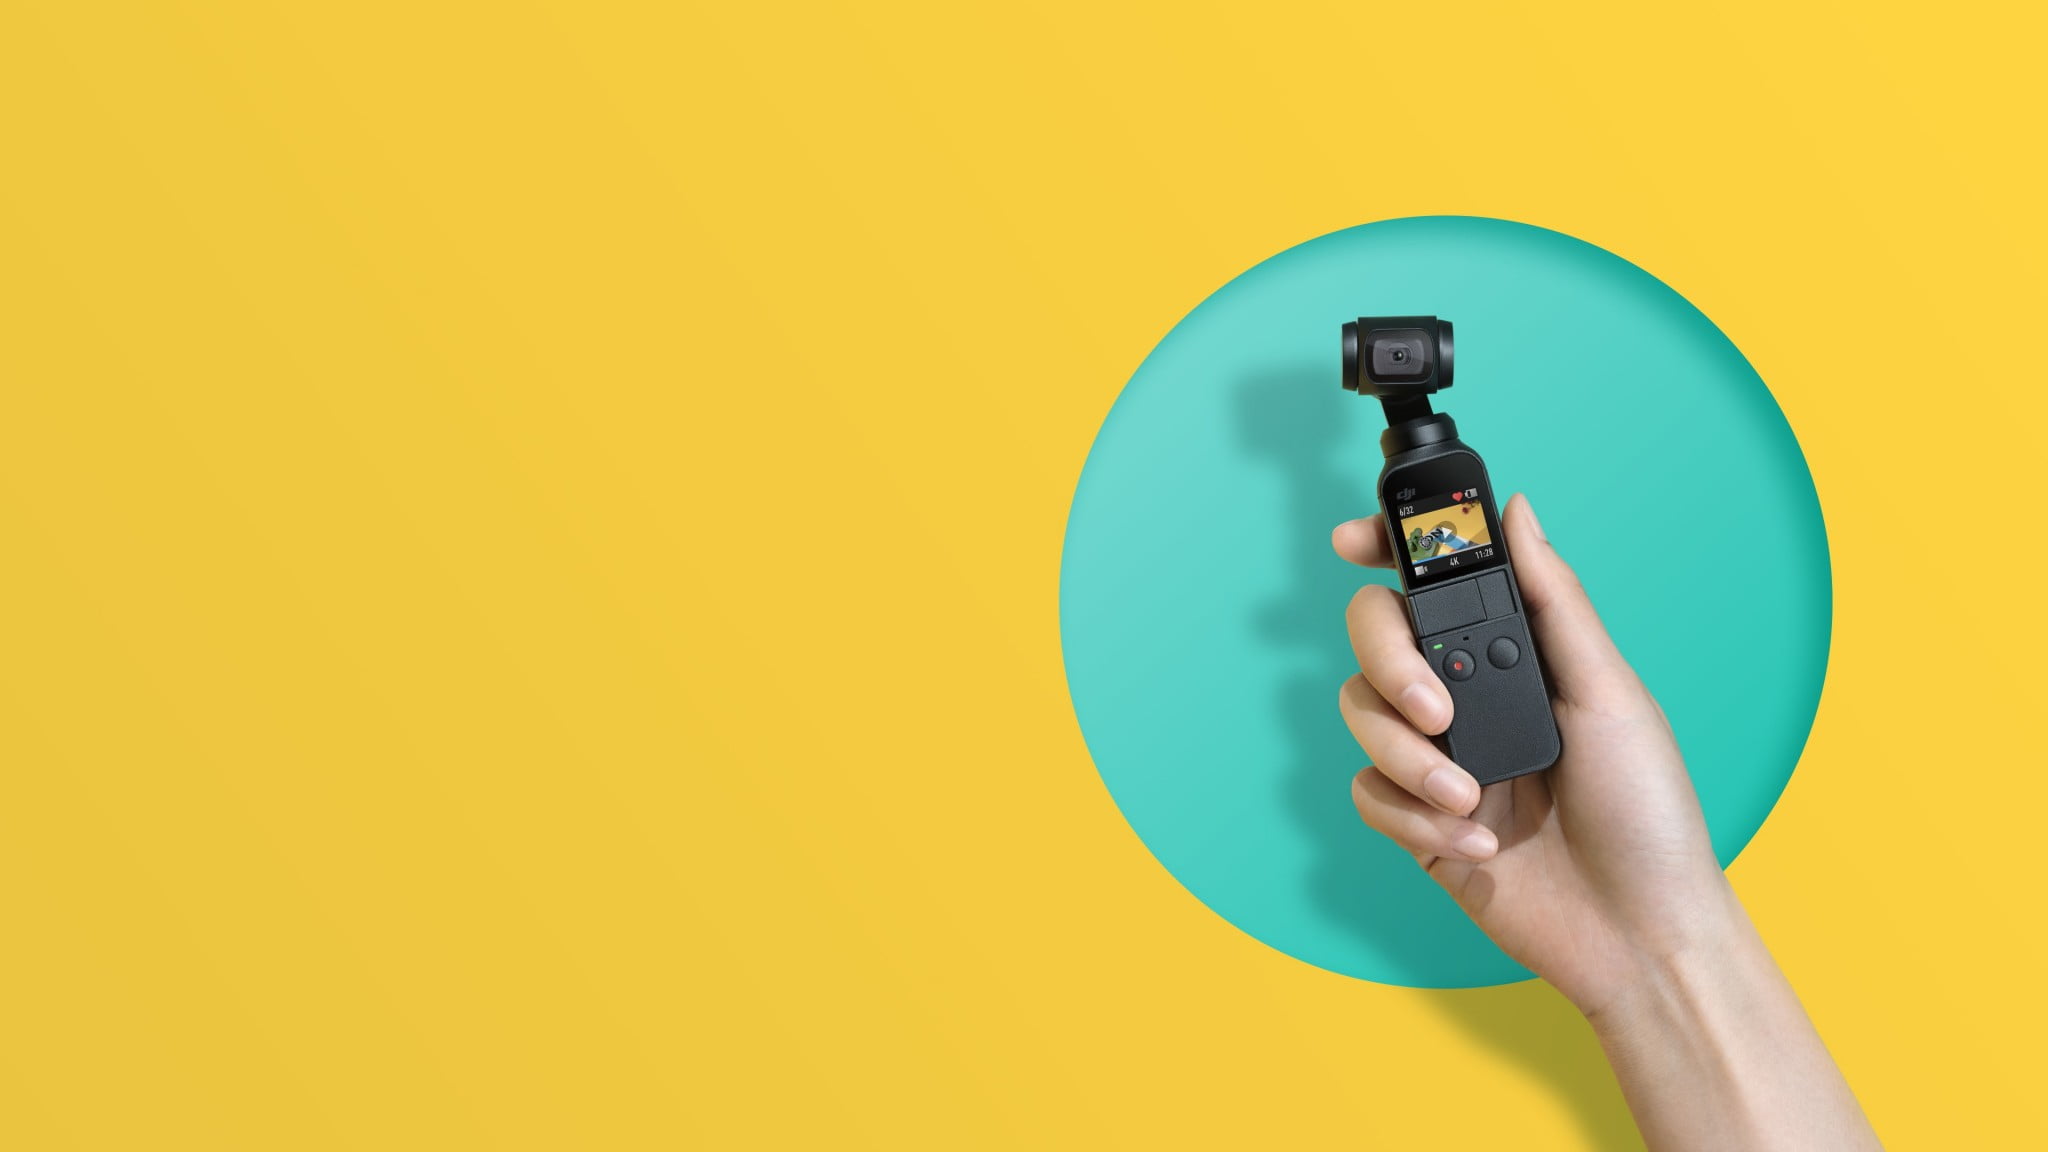 Image contains DJI Osmo Pocket Gimbal 4k Camera in hands